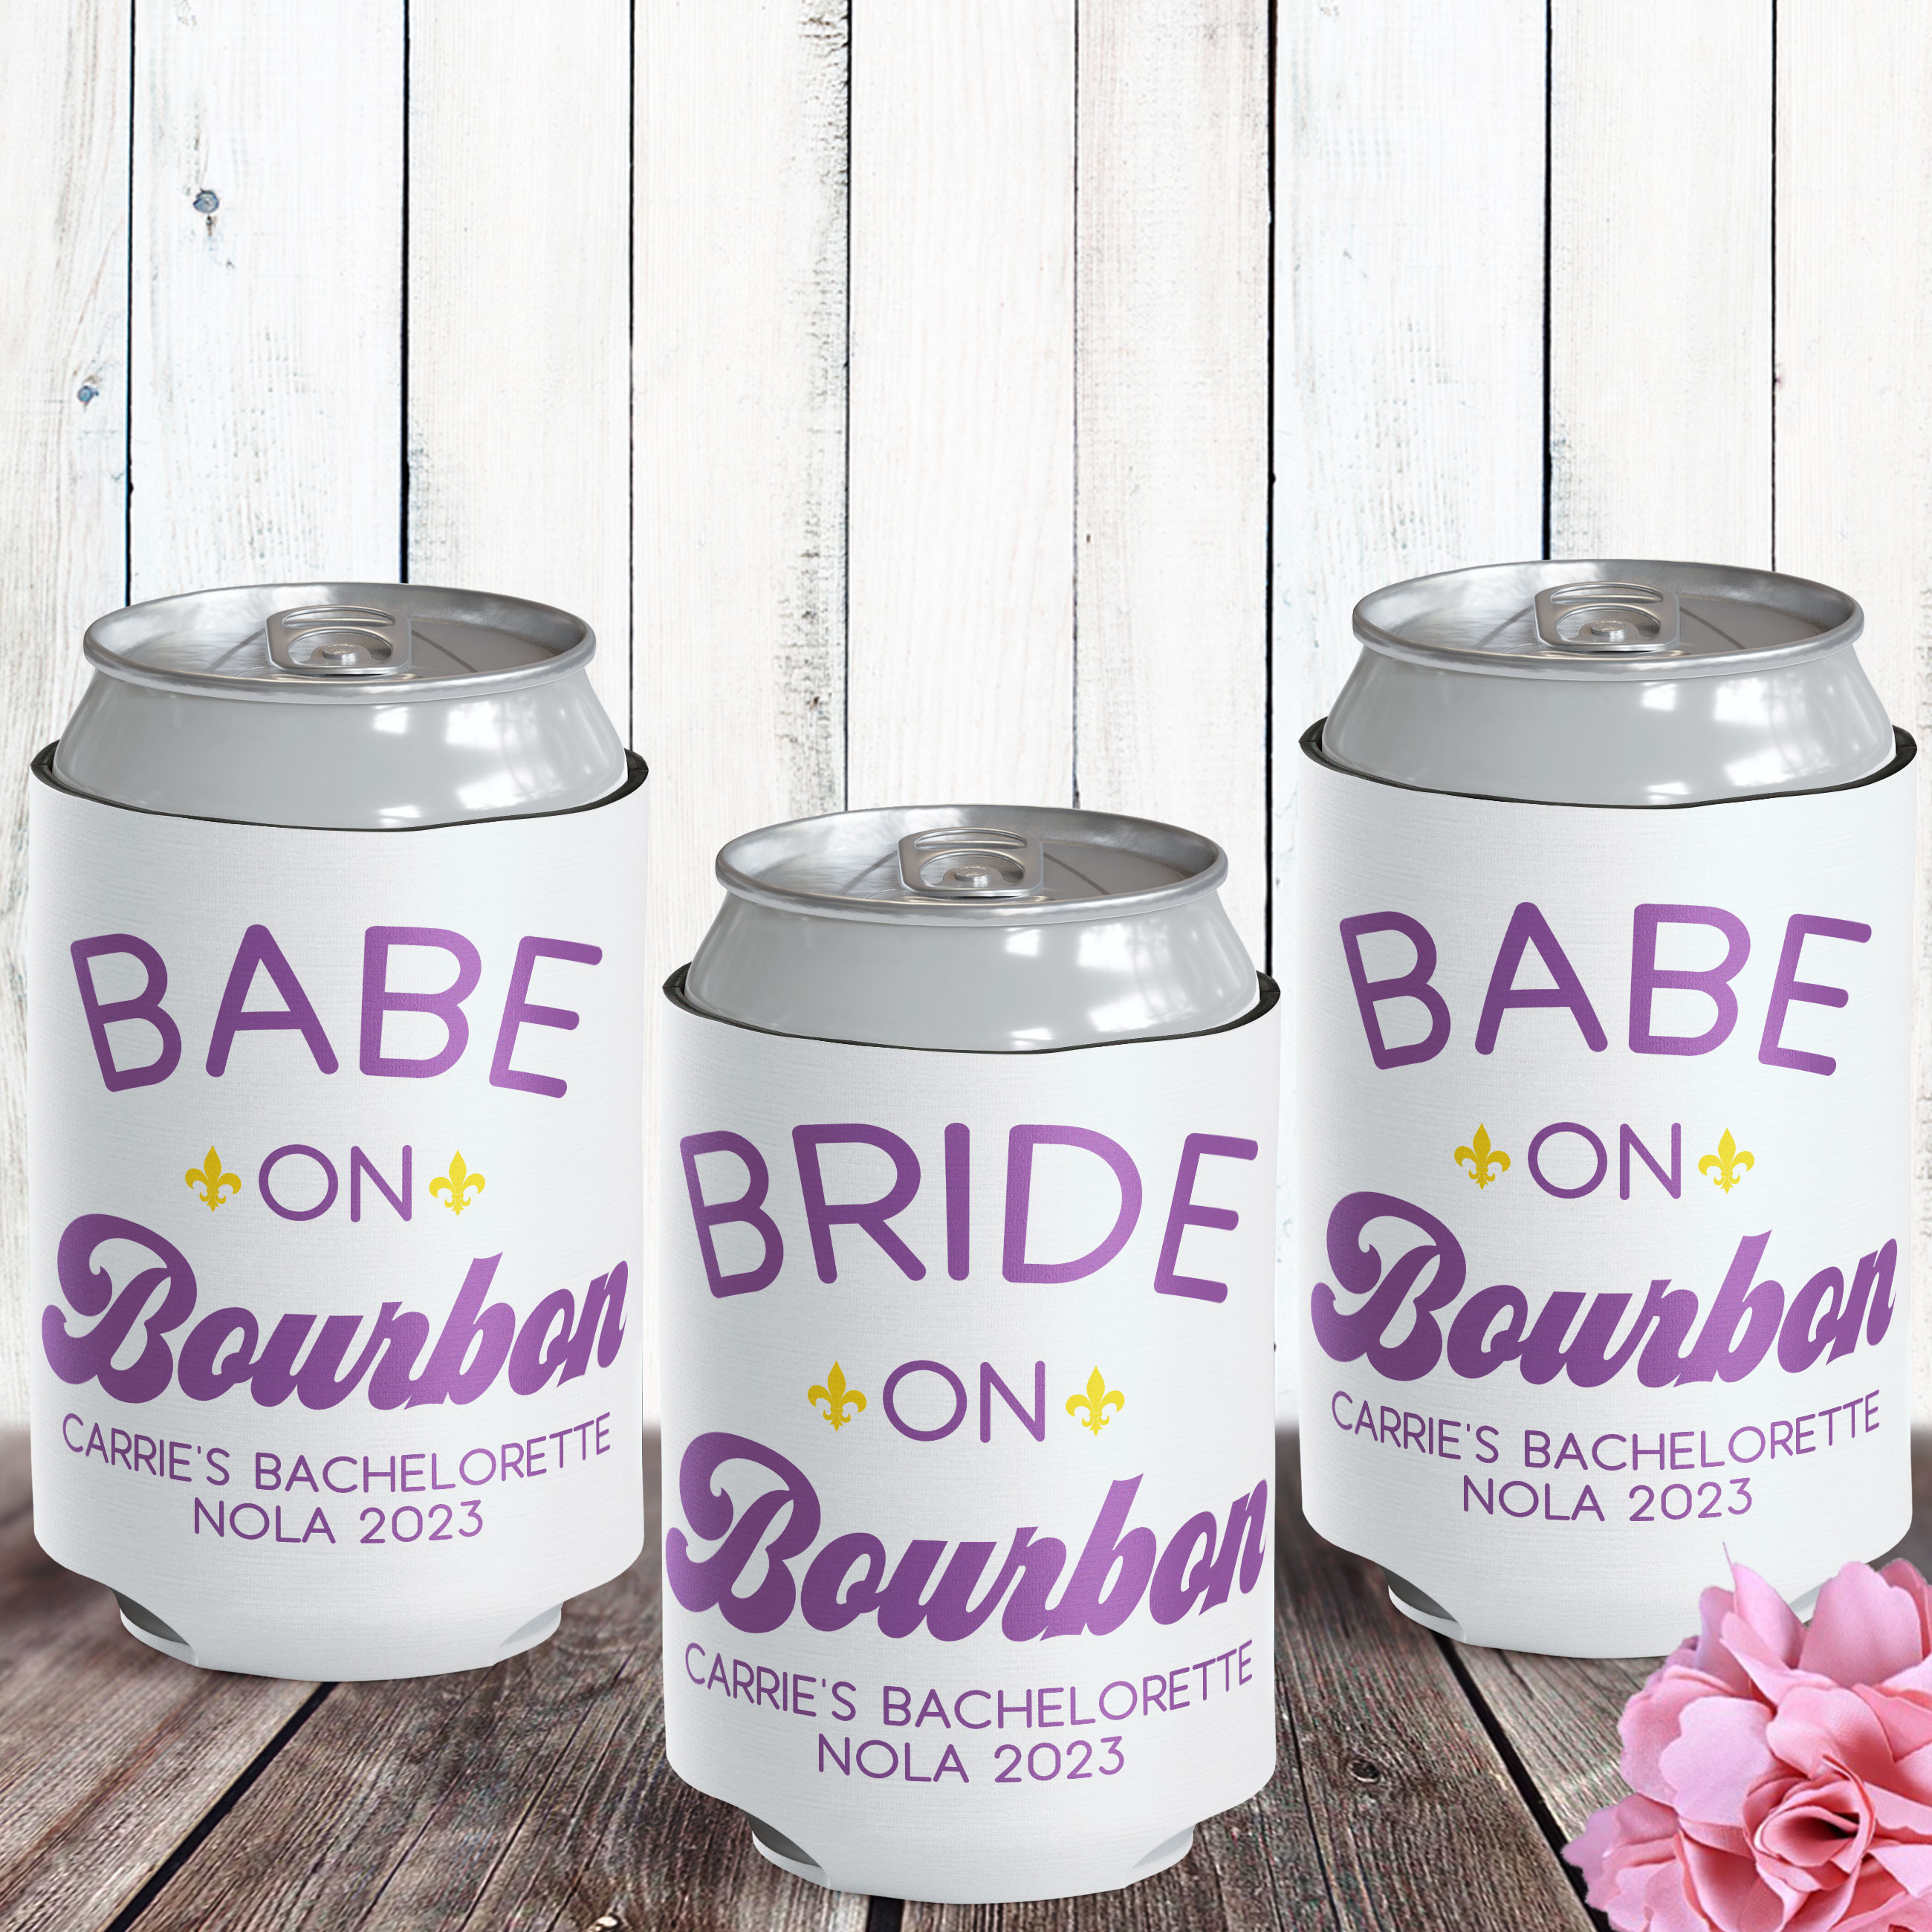 https://cdn11.bigcommerce.com/s-5grzuu6/images/stencil/original/products/6031/54021/Bride-and-Babe-on-Bourbon-Can-Coolers__81095.1683167545.jpg?c=2